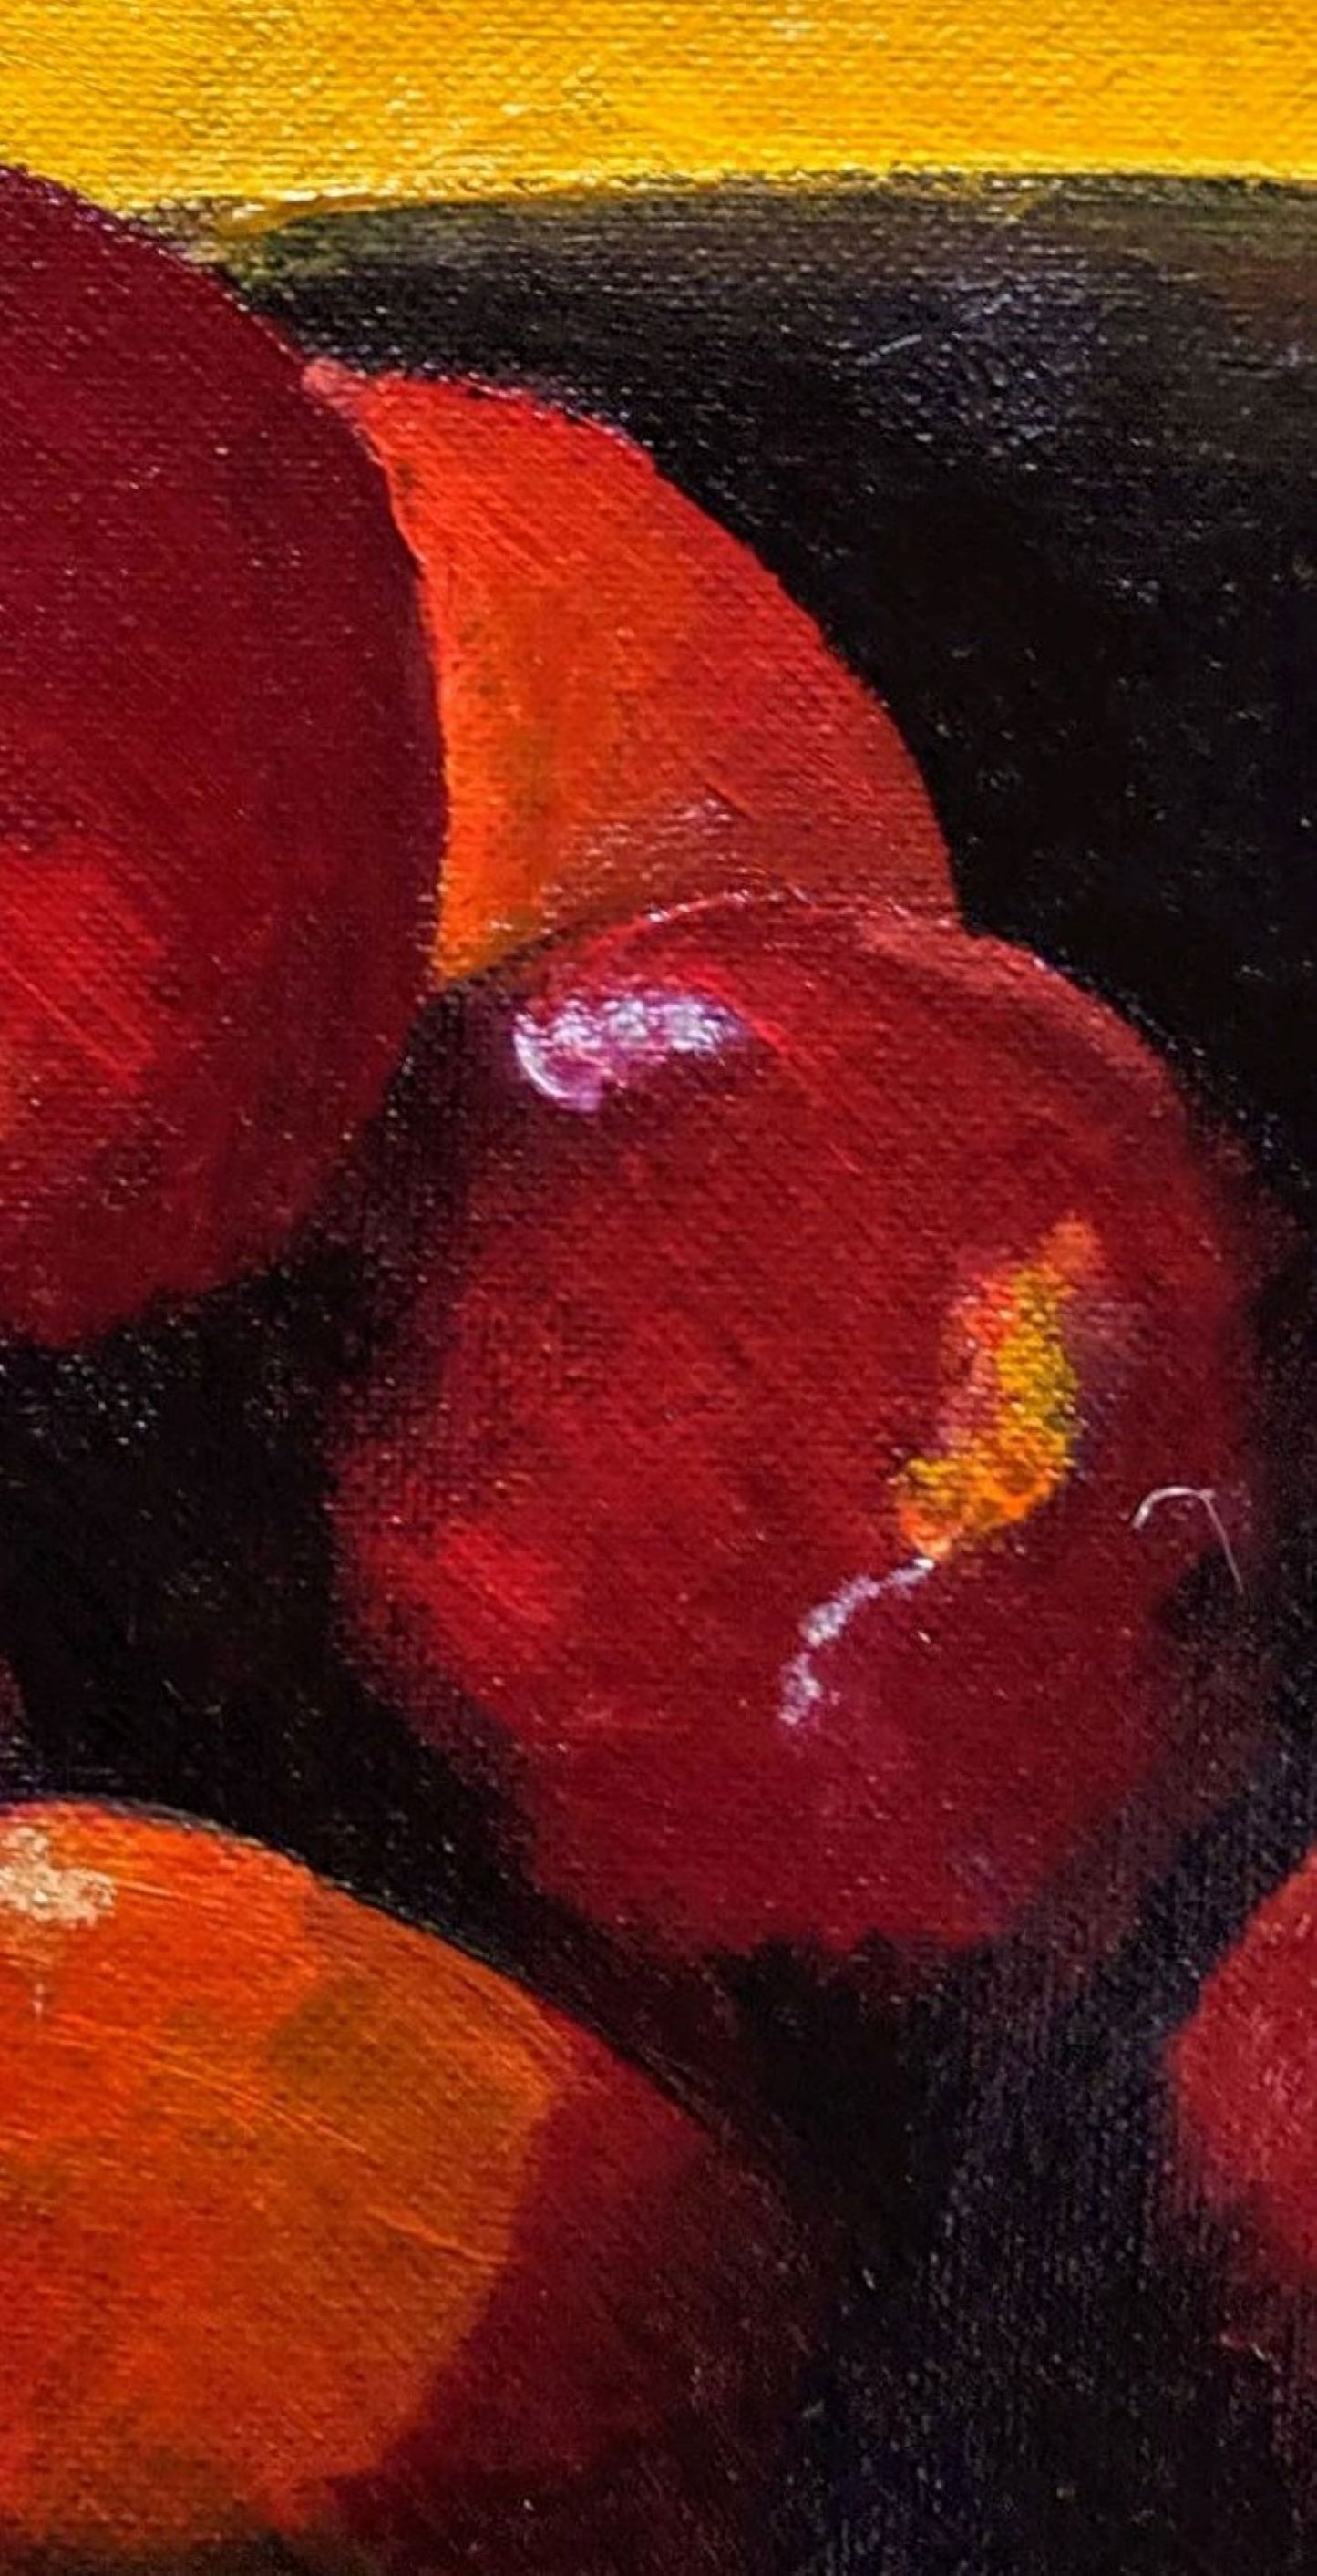 Warm apples acrylic painting detail